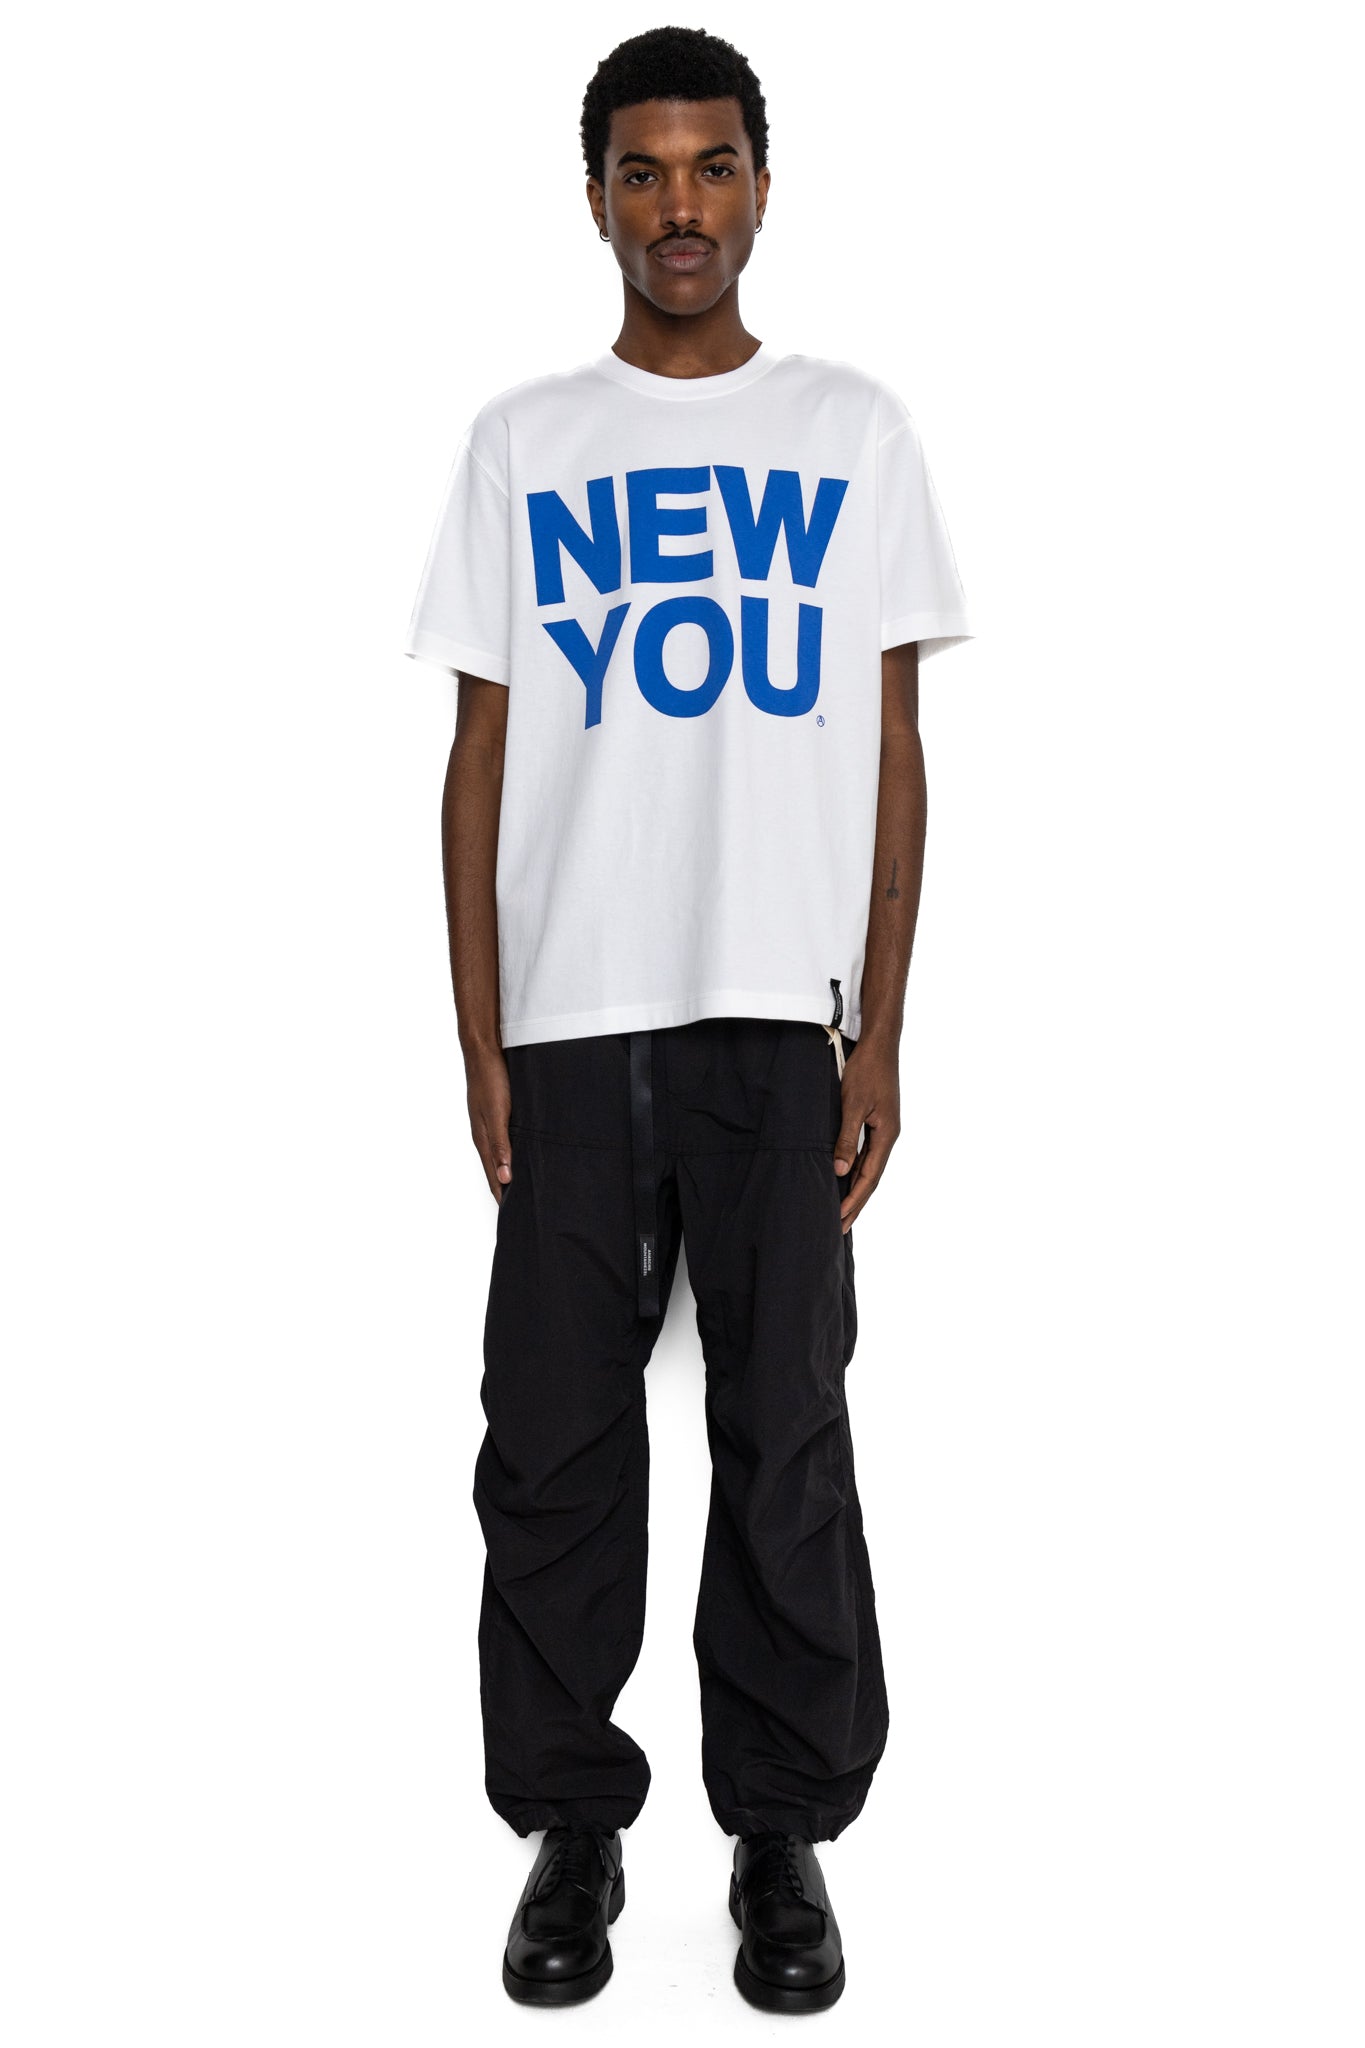 NEW YOU T - White